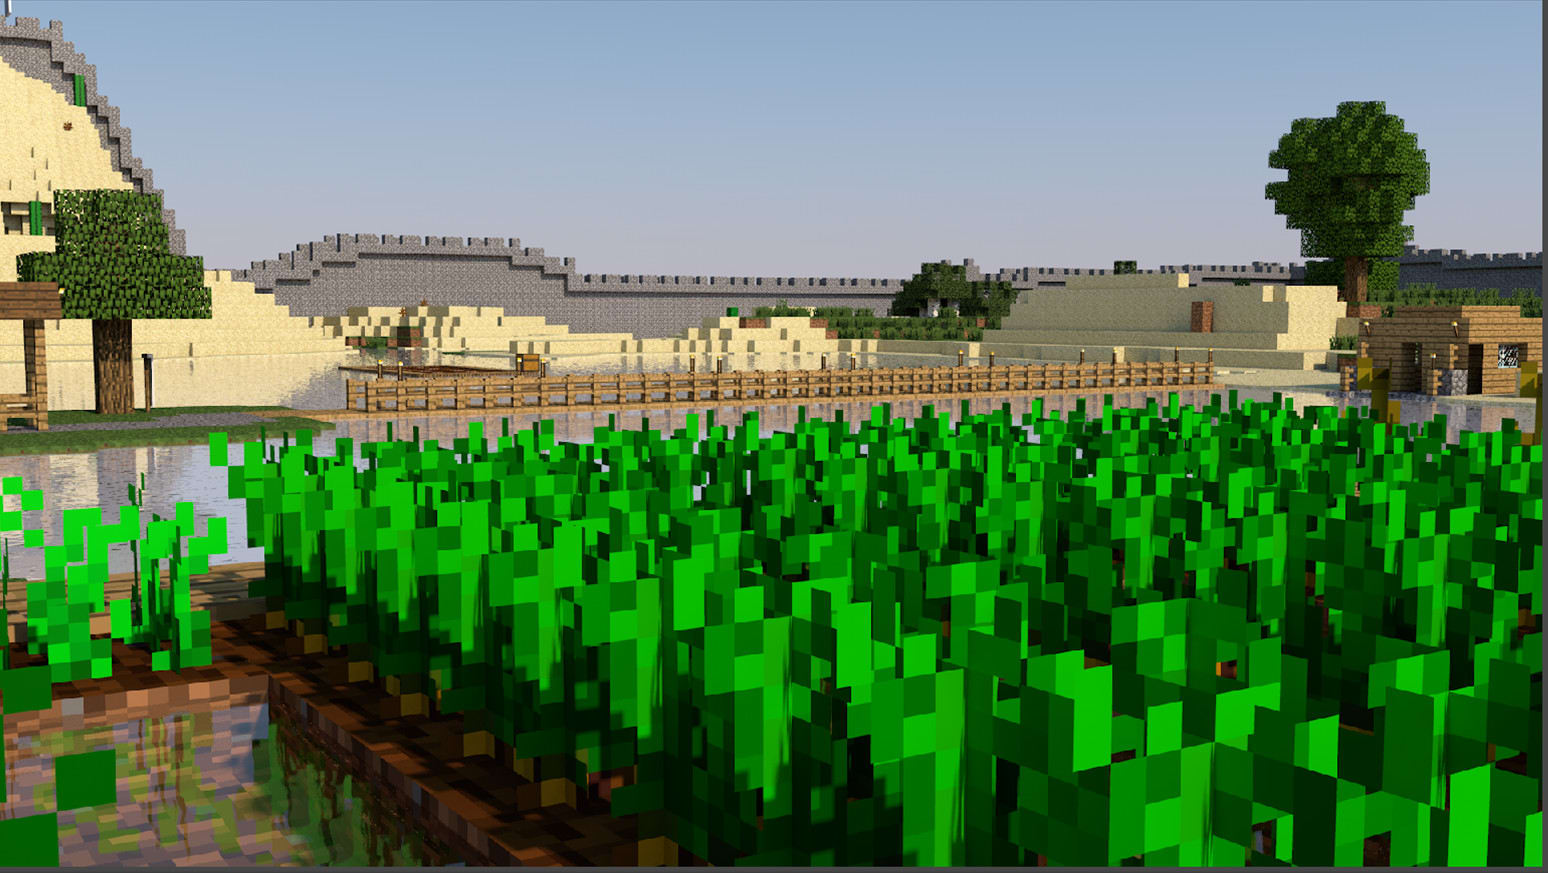 realistic minecraft wallpaper by Arvidholm